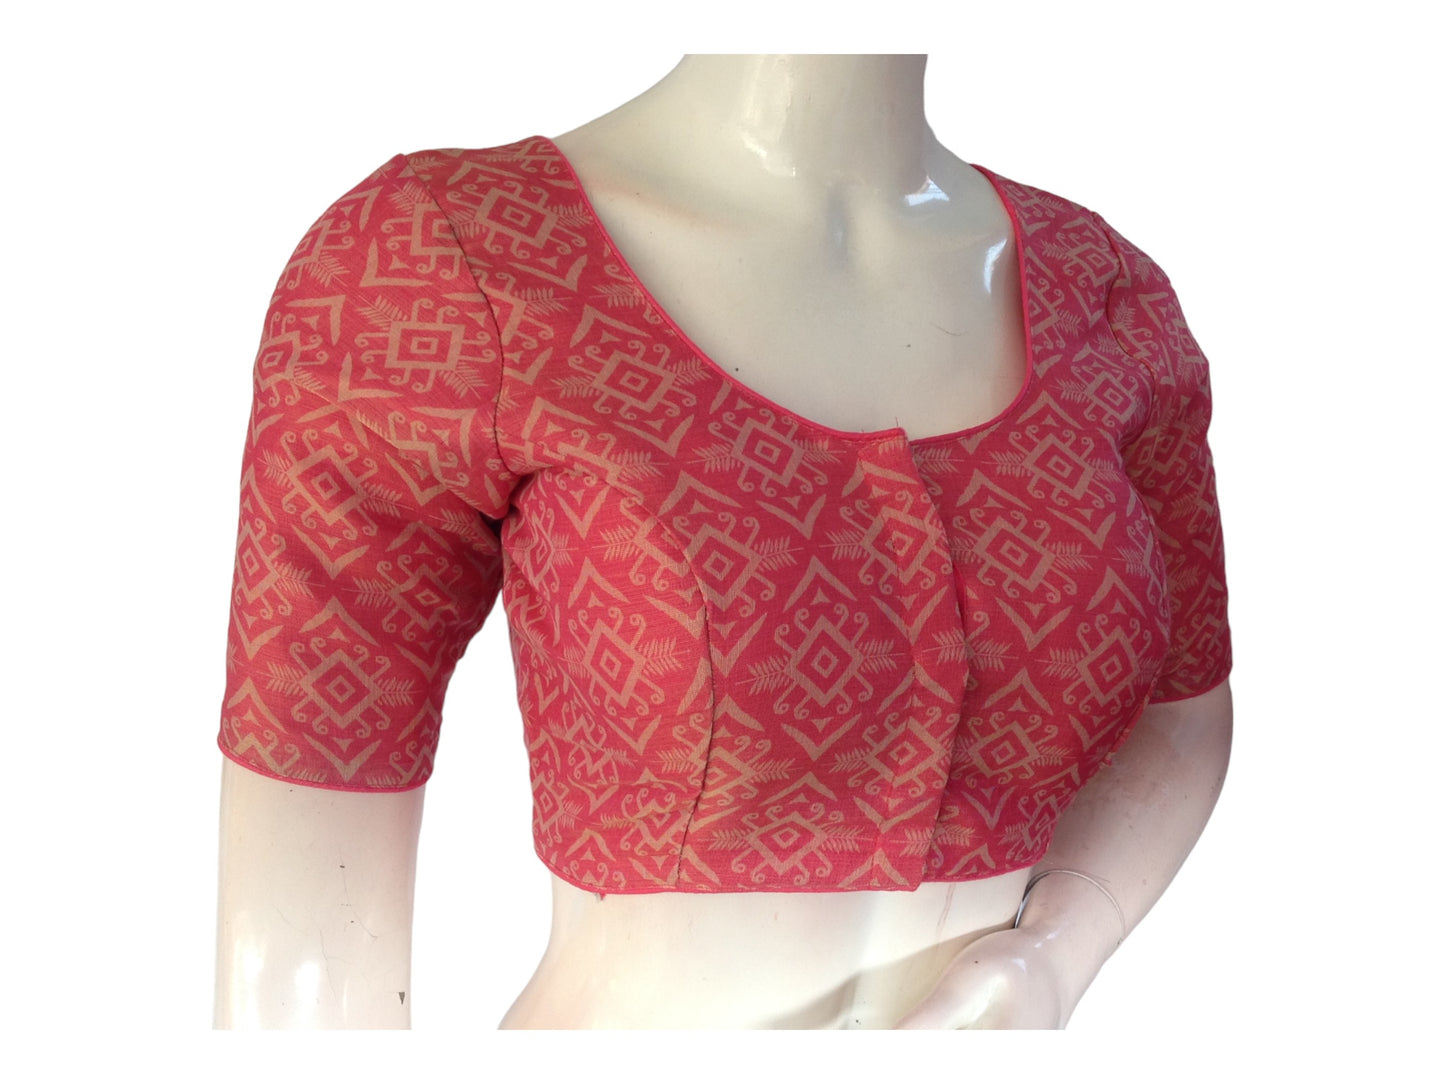 Pink Color Saree Blouse, Indian Readymade Blouse, Tissue Silk Choli top Online